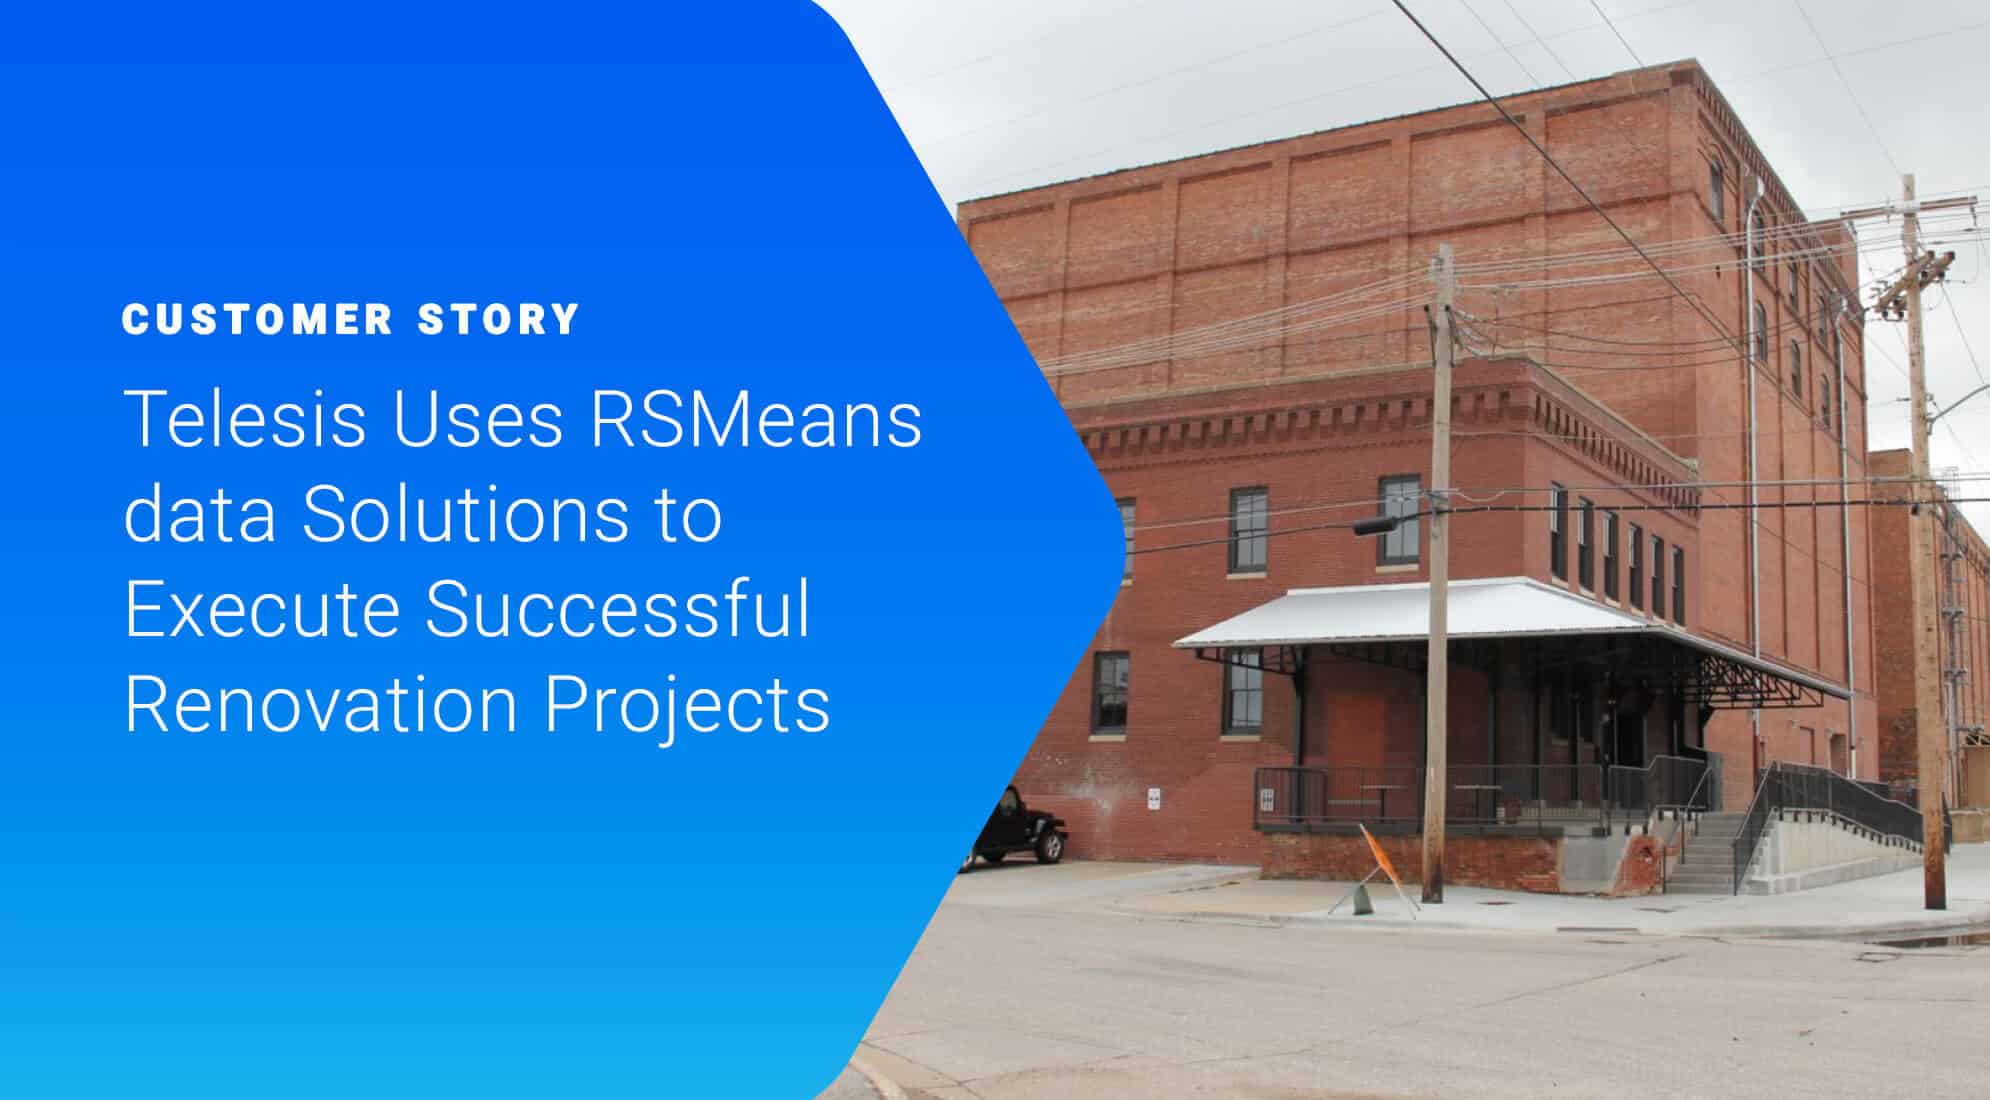 Renovation Projects Made Easier Using RSMeans data 3